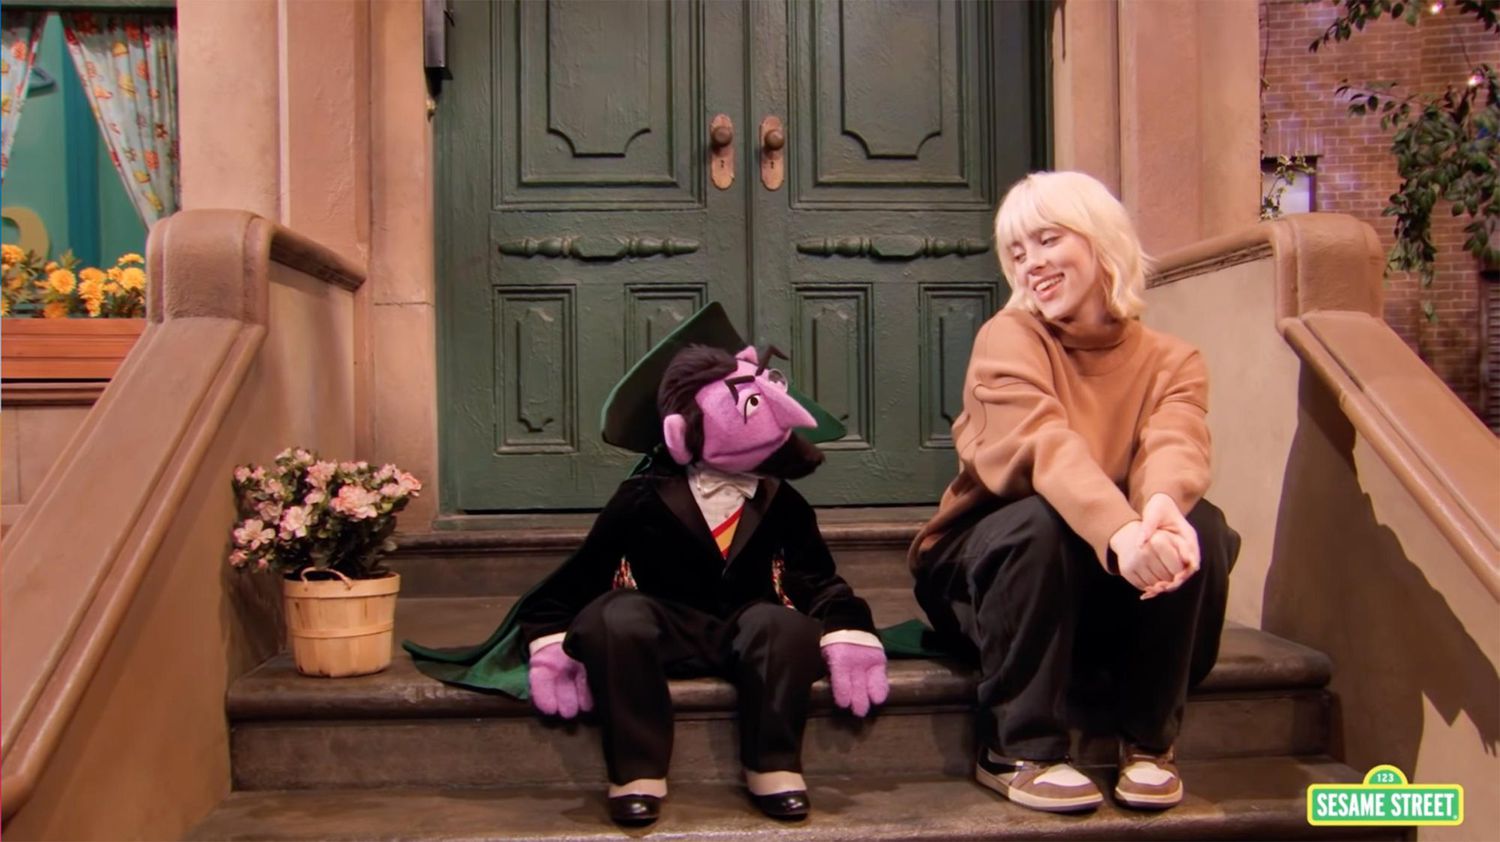 The Count and Billie Eilish on Sesame Street